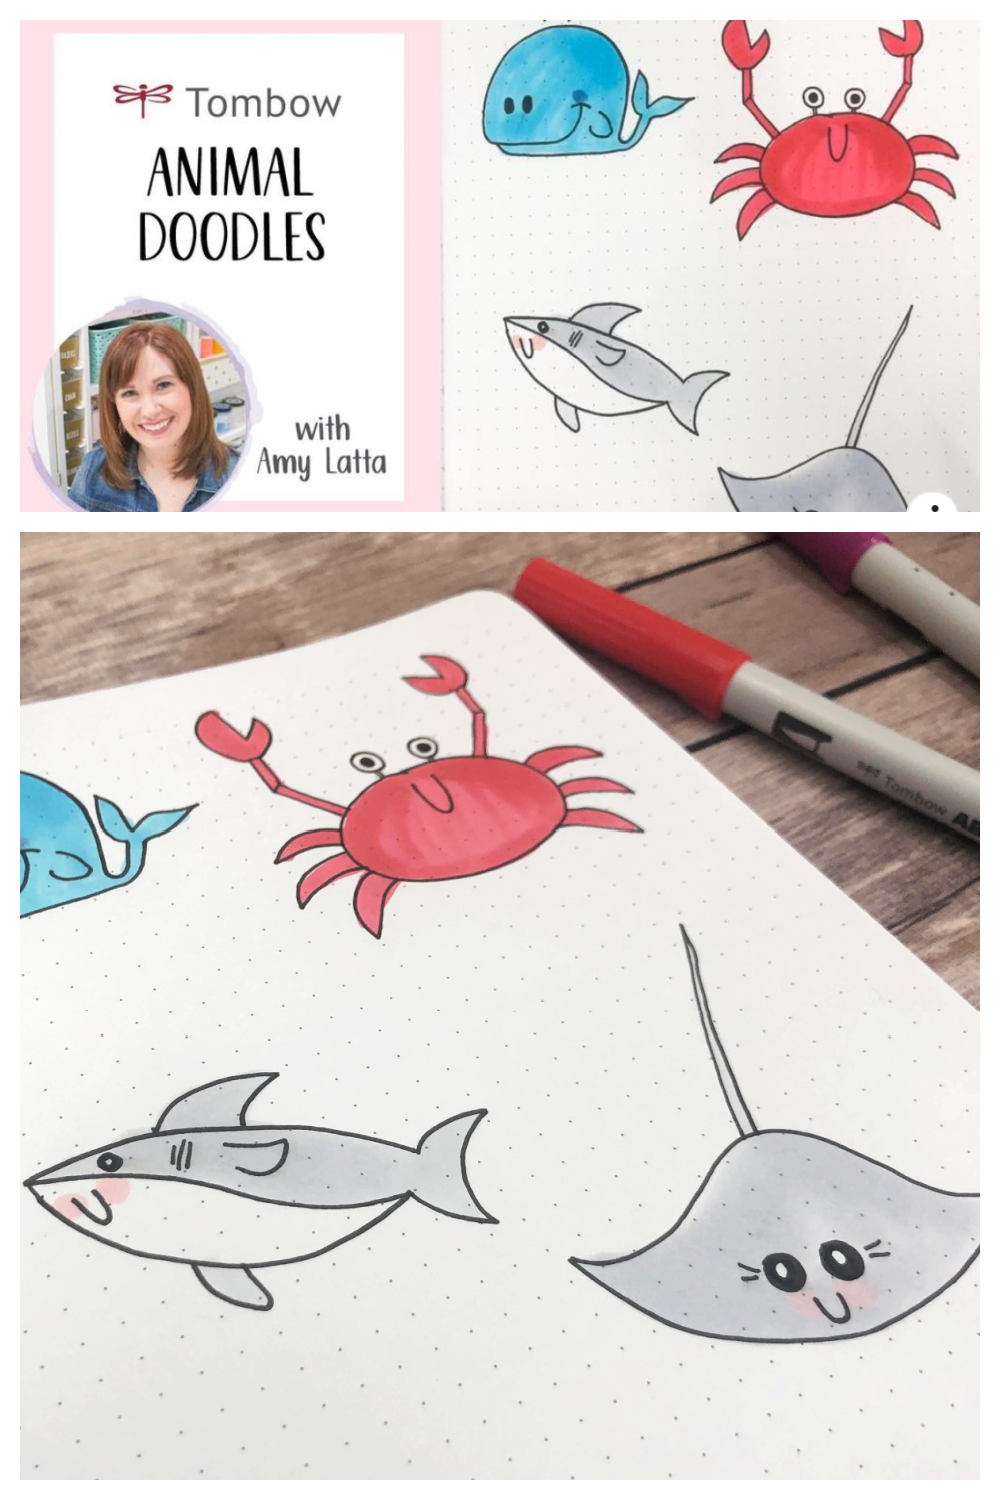 Image is a collage of sea animal doodles.